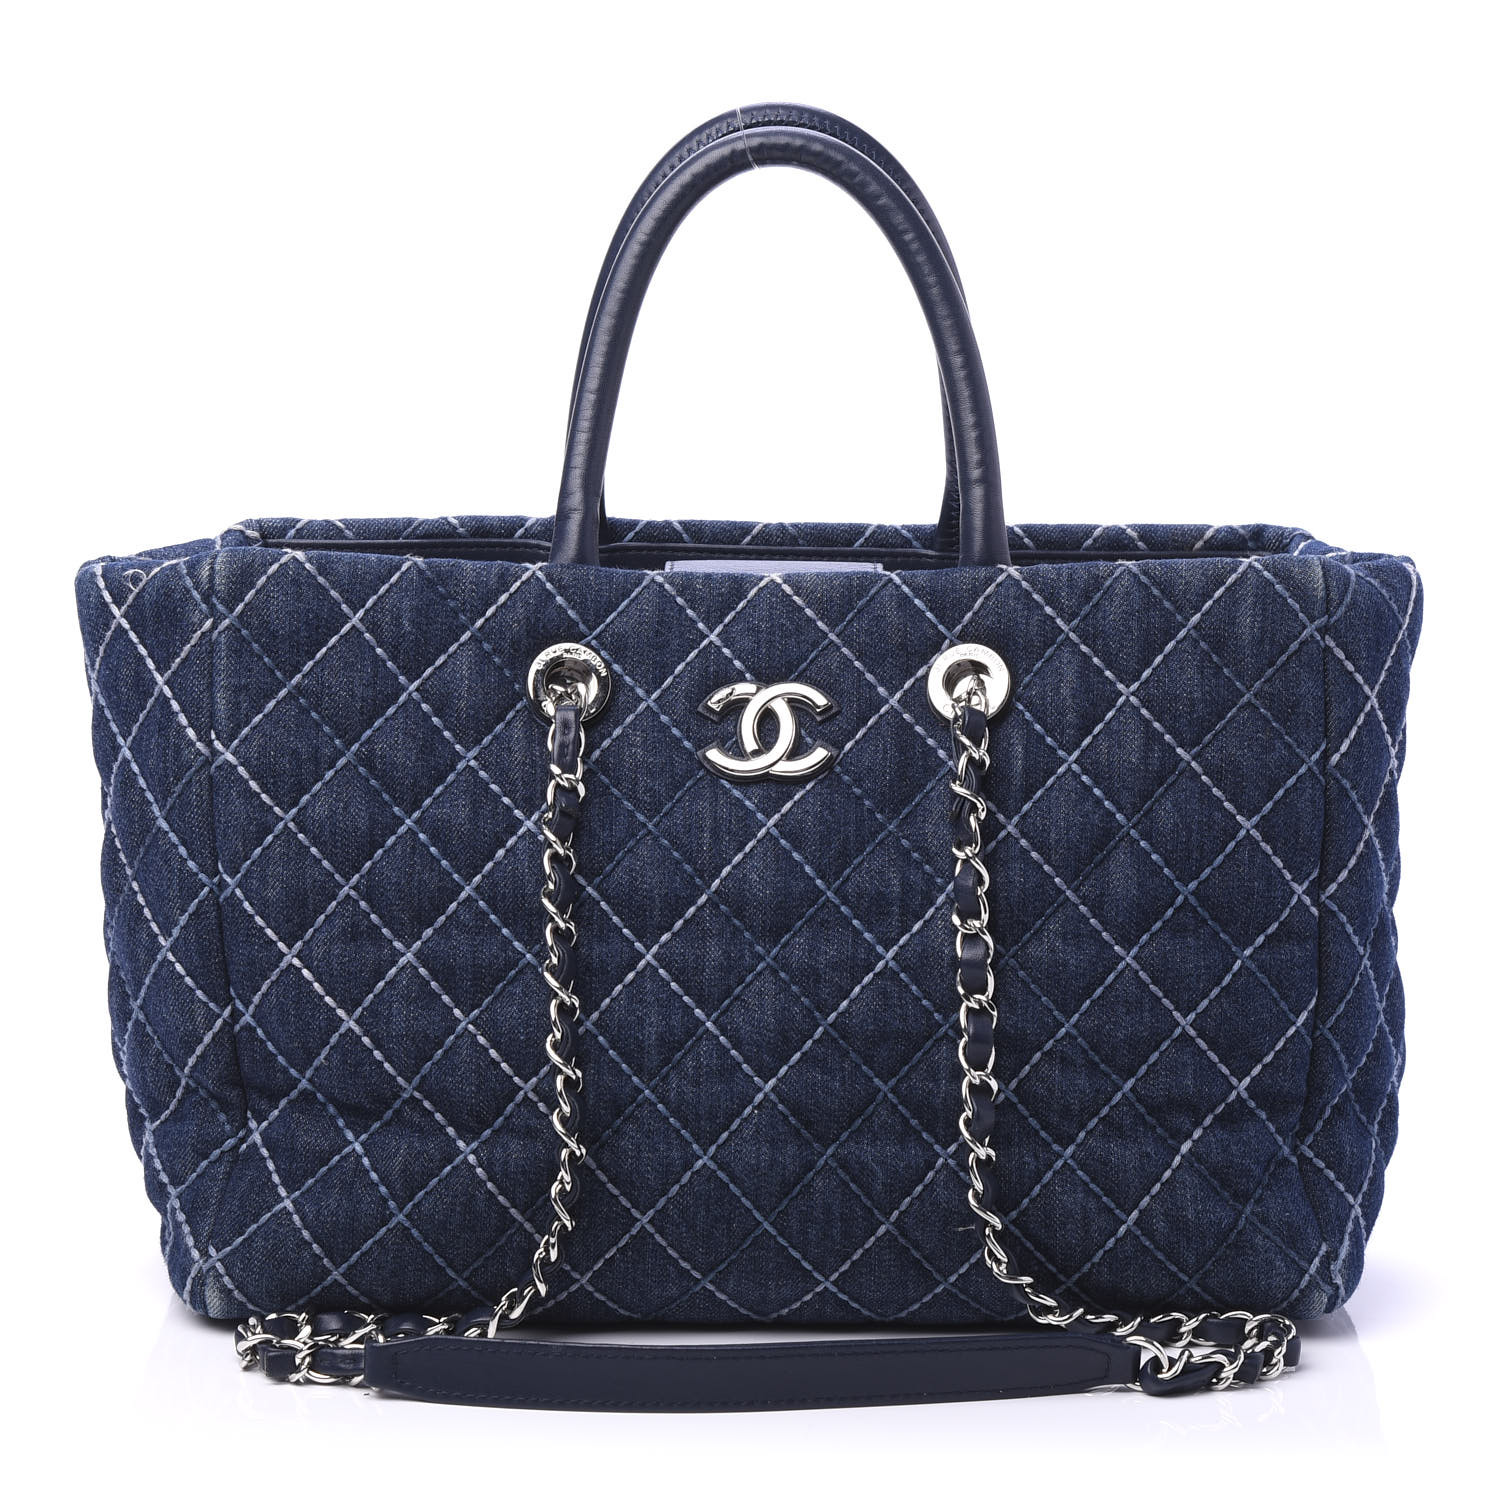 CHANEL Denim Quilted Large Coco Handle Shopping Tote Blue 602495